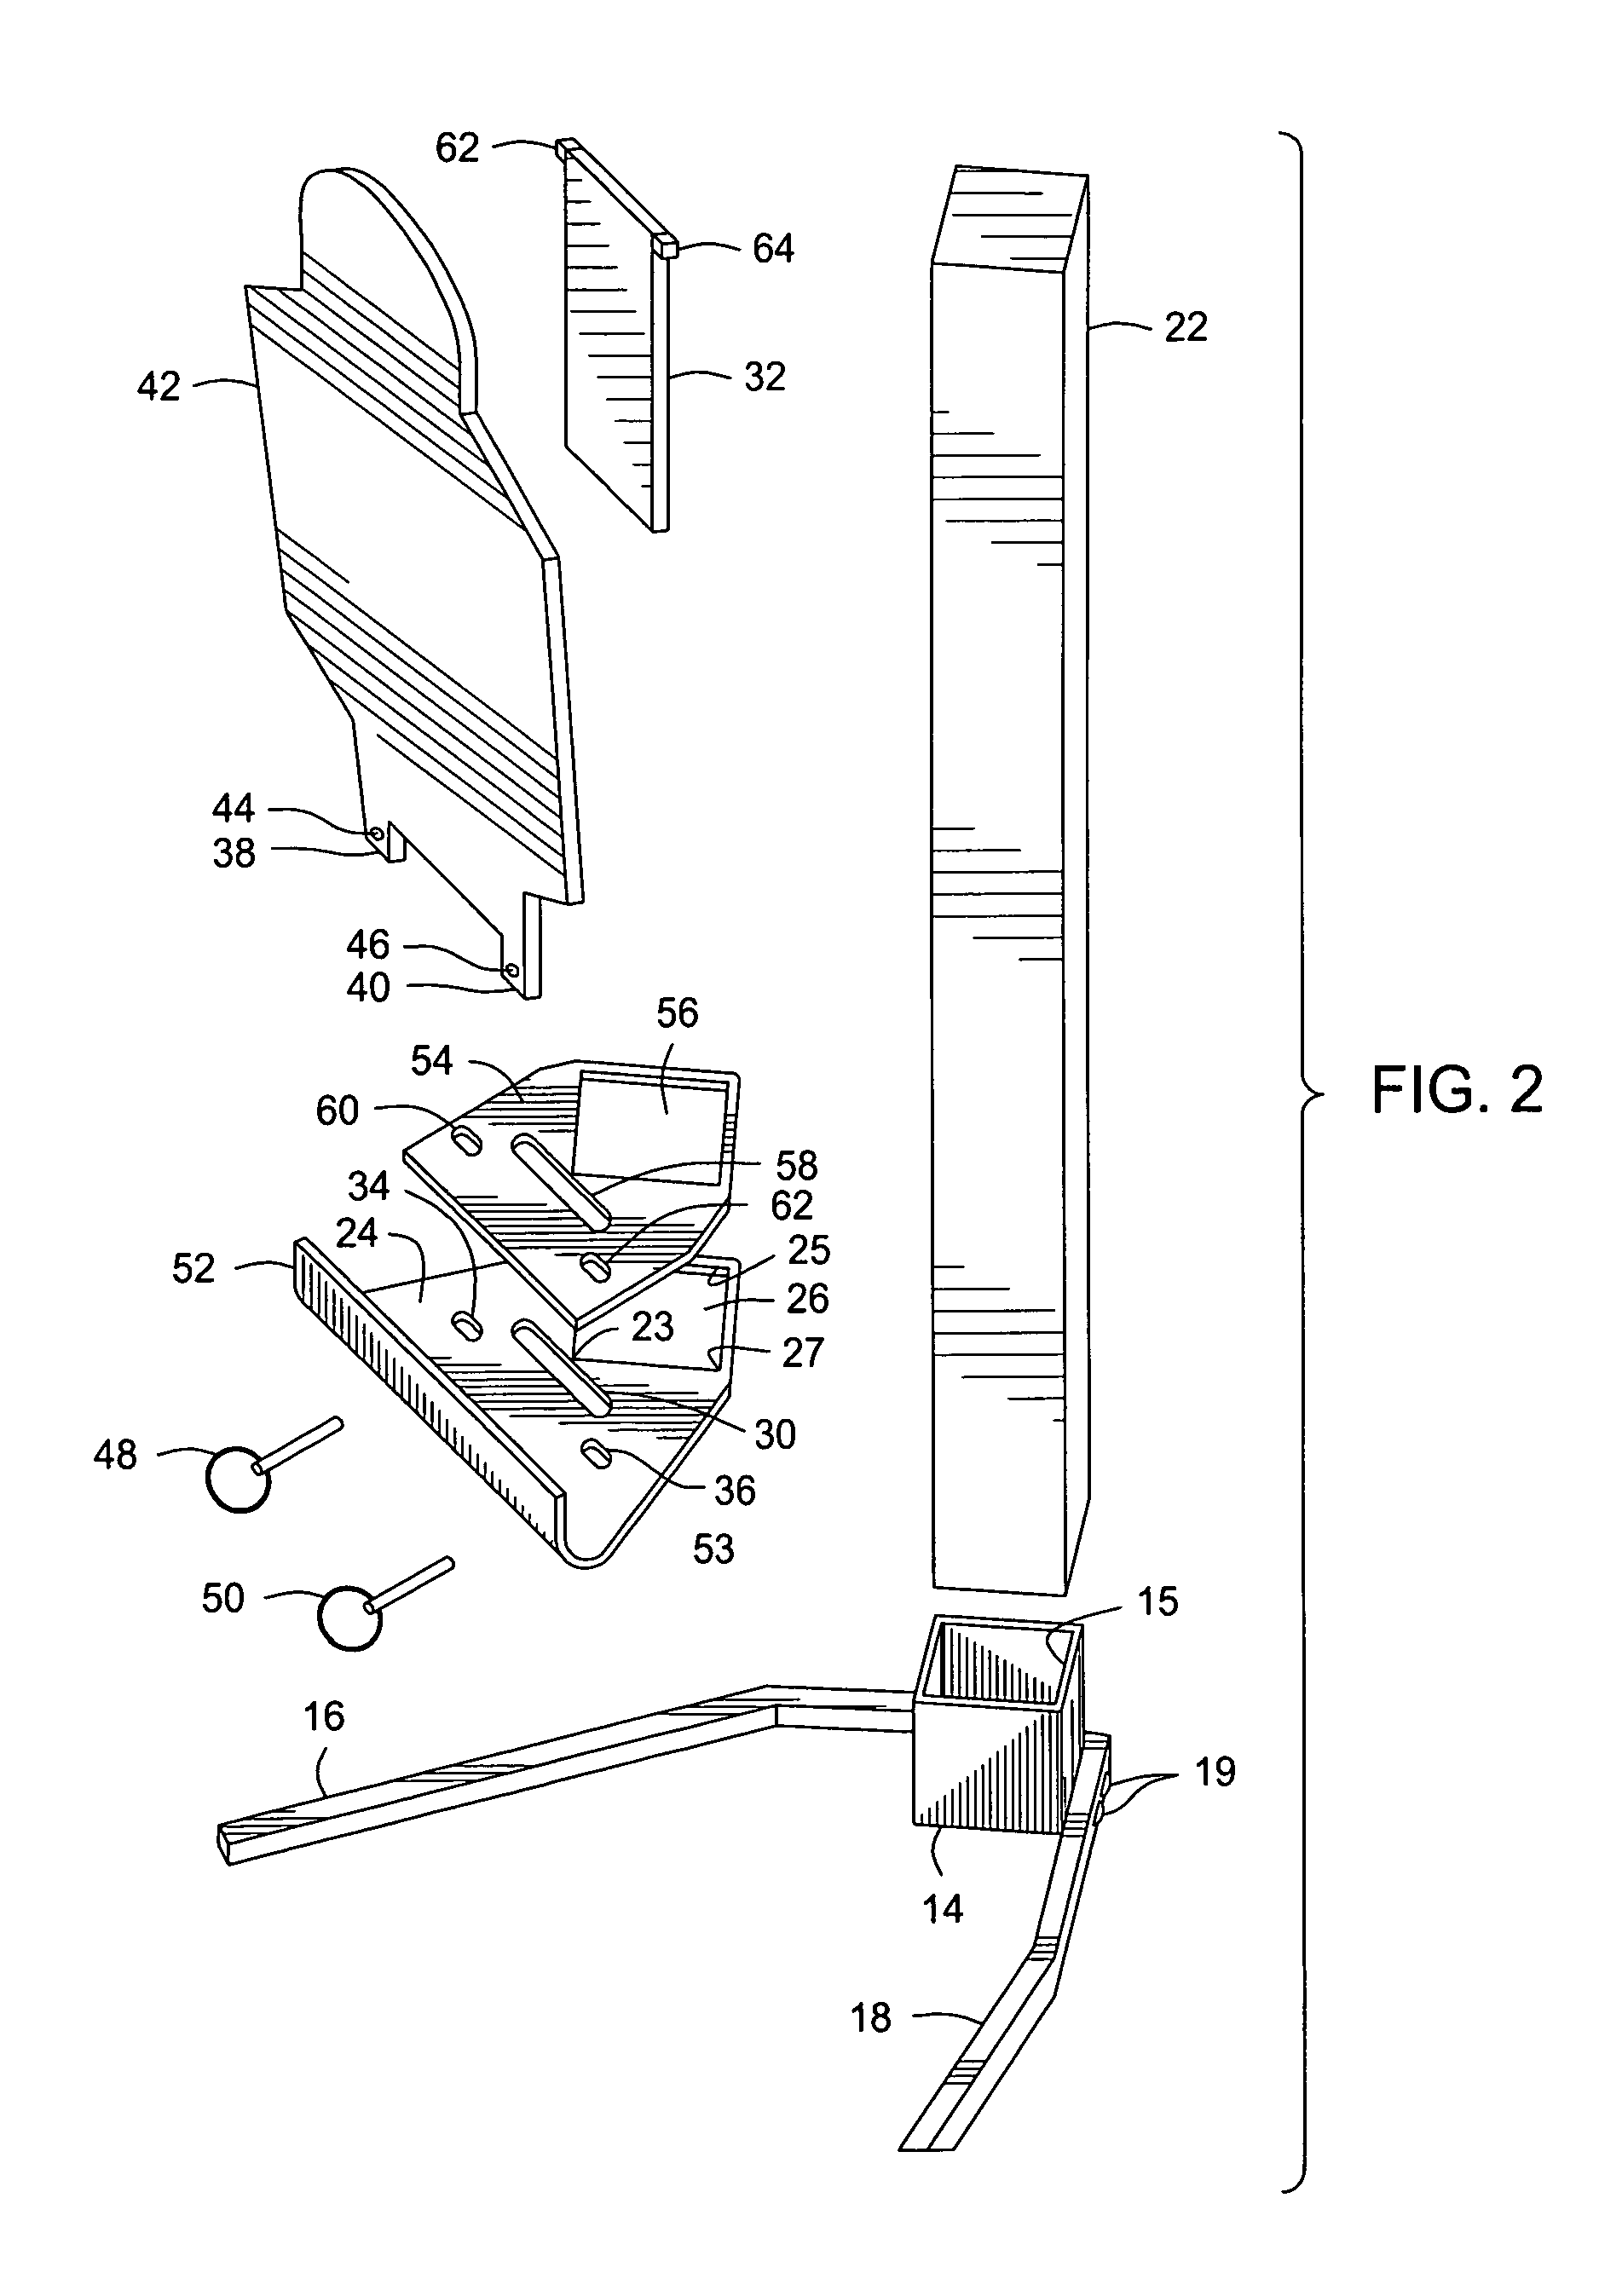 Free-standing action target mechanism for firearm training